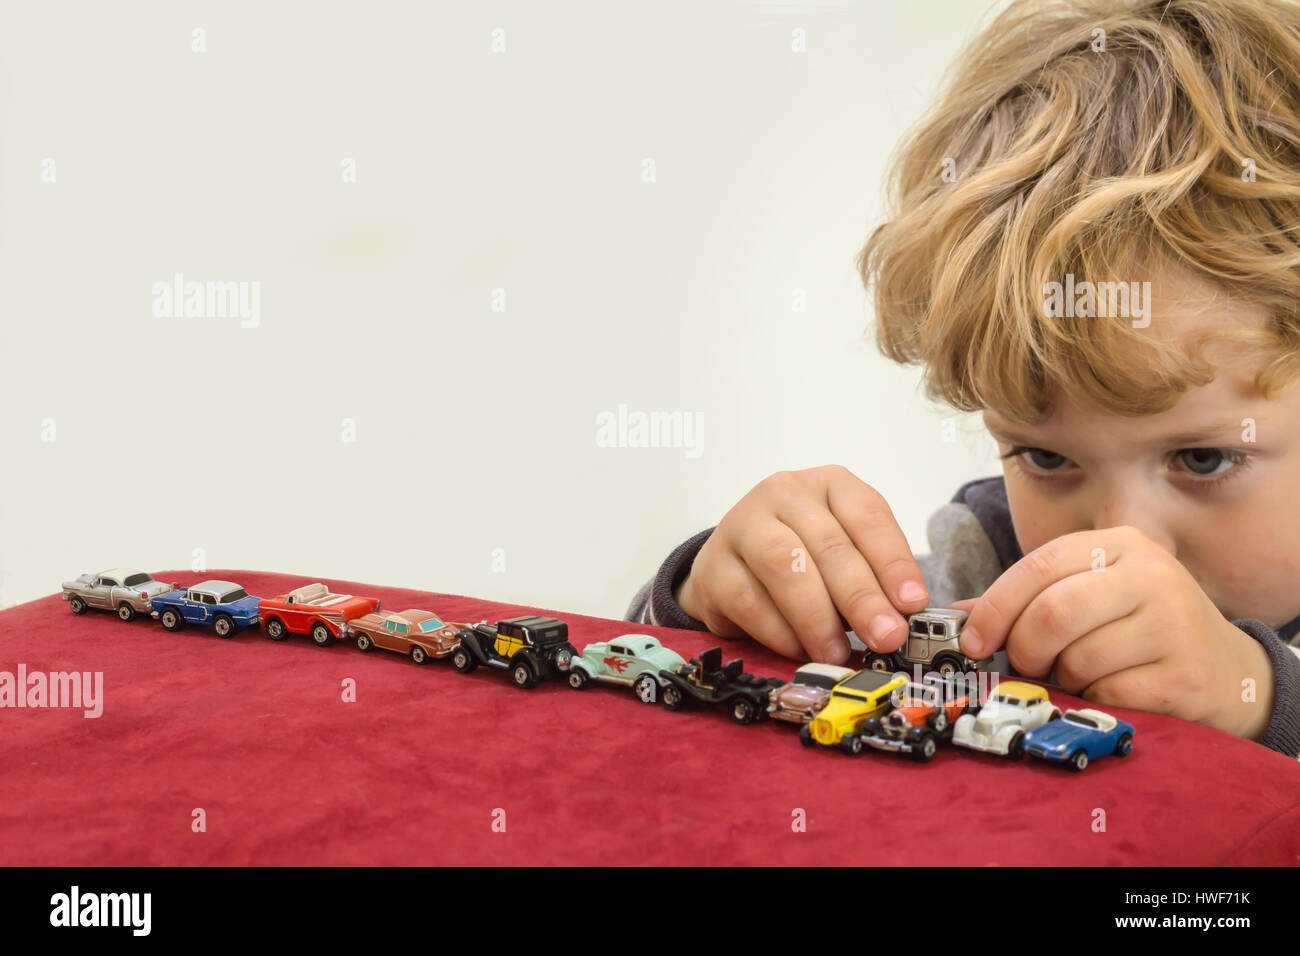 QUEENSTOWN, SOUTH AFRICA - MAY 17 2015 - Little blonde boy playing with vintage toy cars on red velvet pouf chair - Editorial Illustrative Image Stock Photo